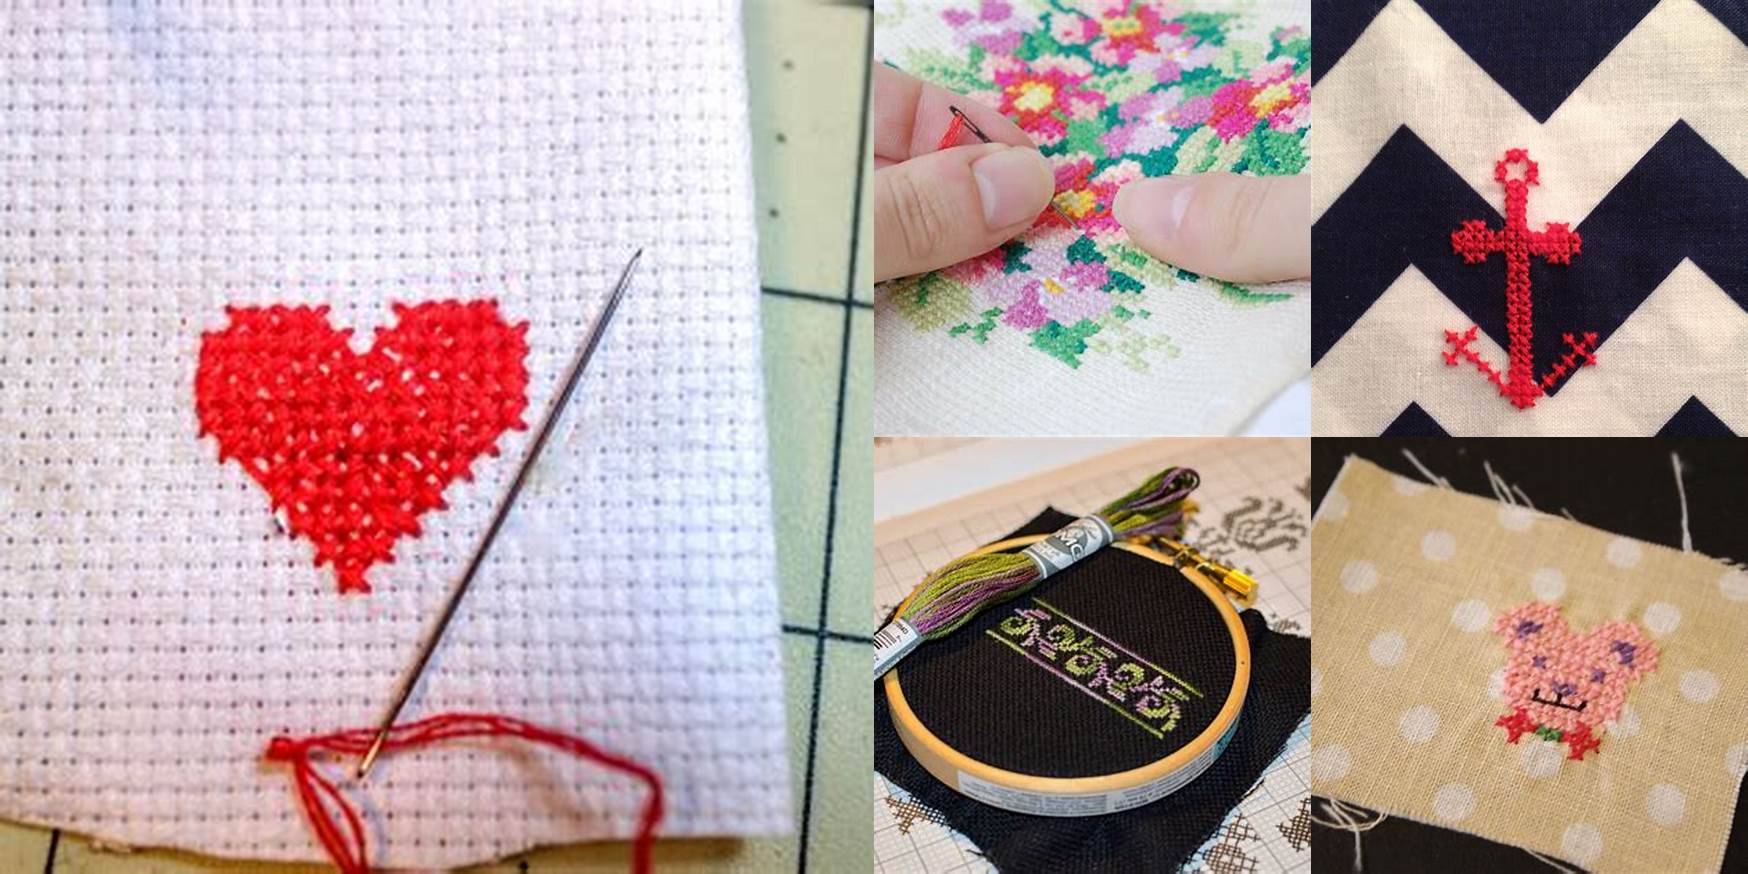 Can You Cross Stitch On Any Fabric